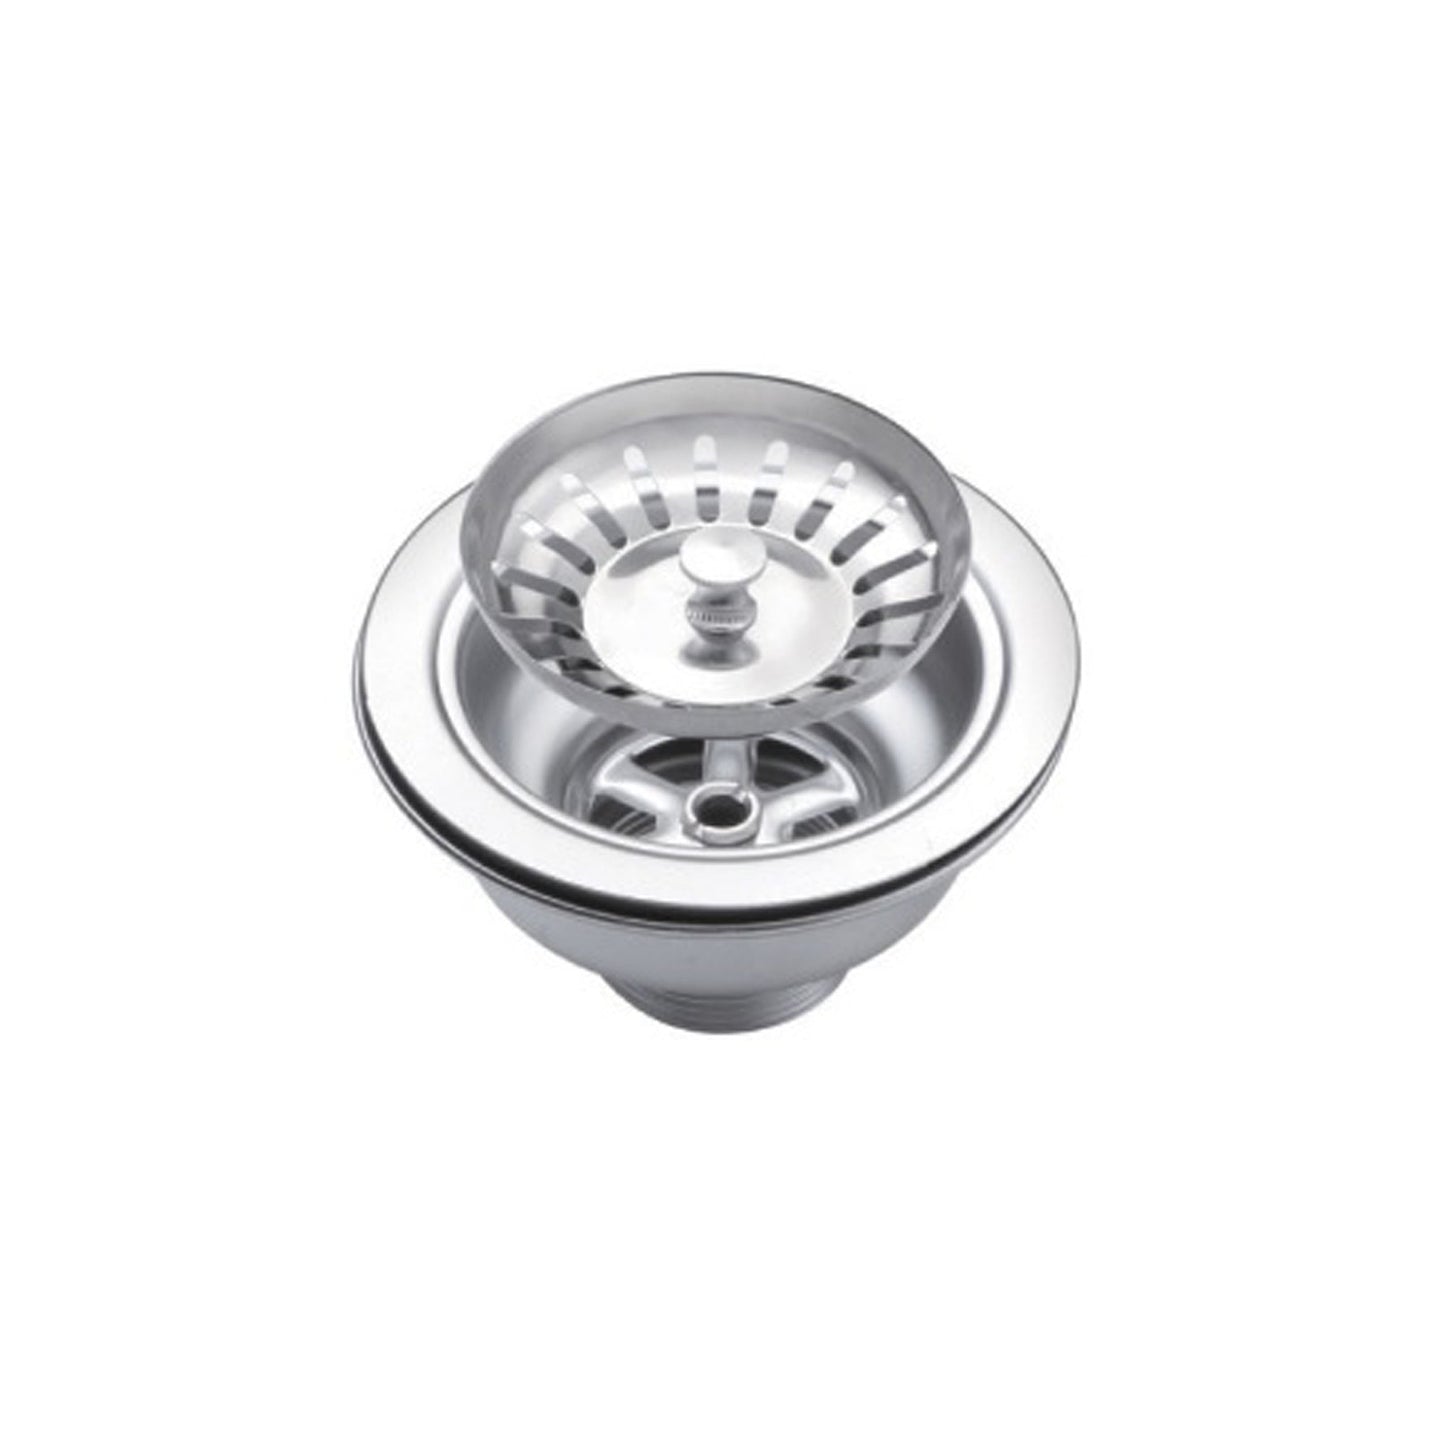 Water Creation Corner Radius 50/50 Double Bowl Stainless Steel Hand Made Undermount 29 Inch X 20 Inch Sink With Drains, Strainers, And Bottom Grids